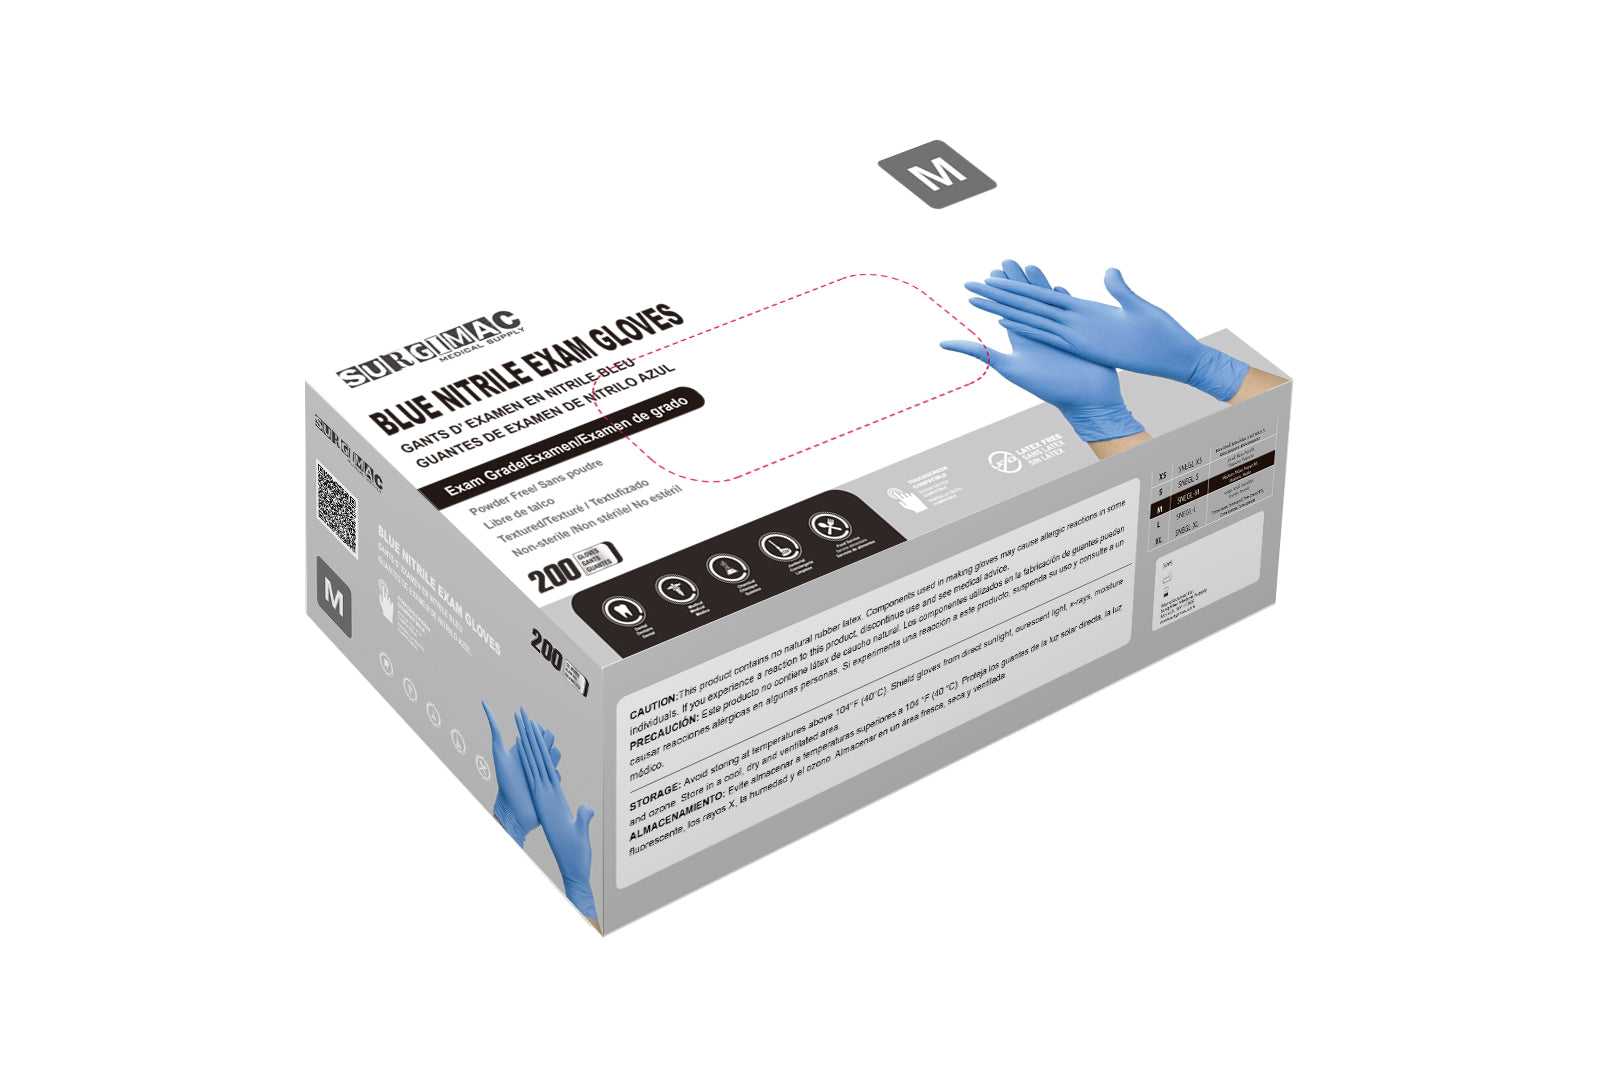 Medical Nitrile Examination Gloves MaxSoft: Comfortable, Flexible, and Durable